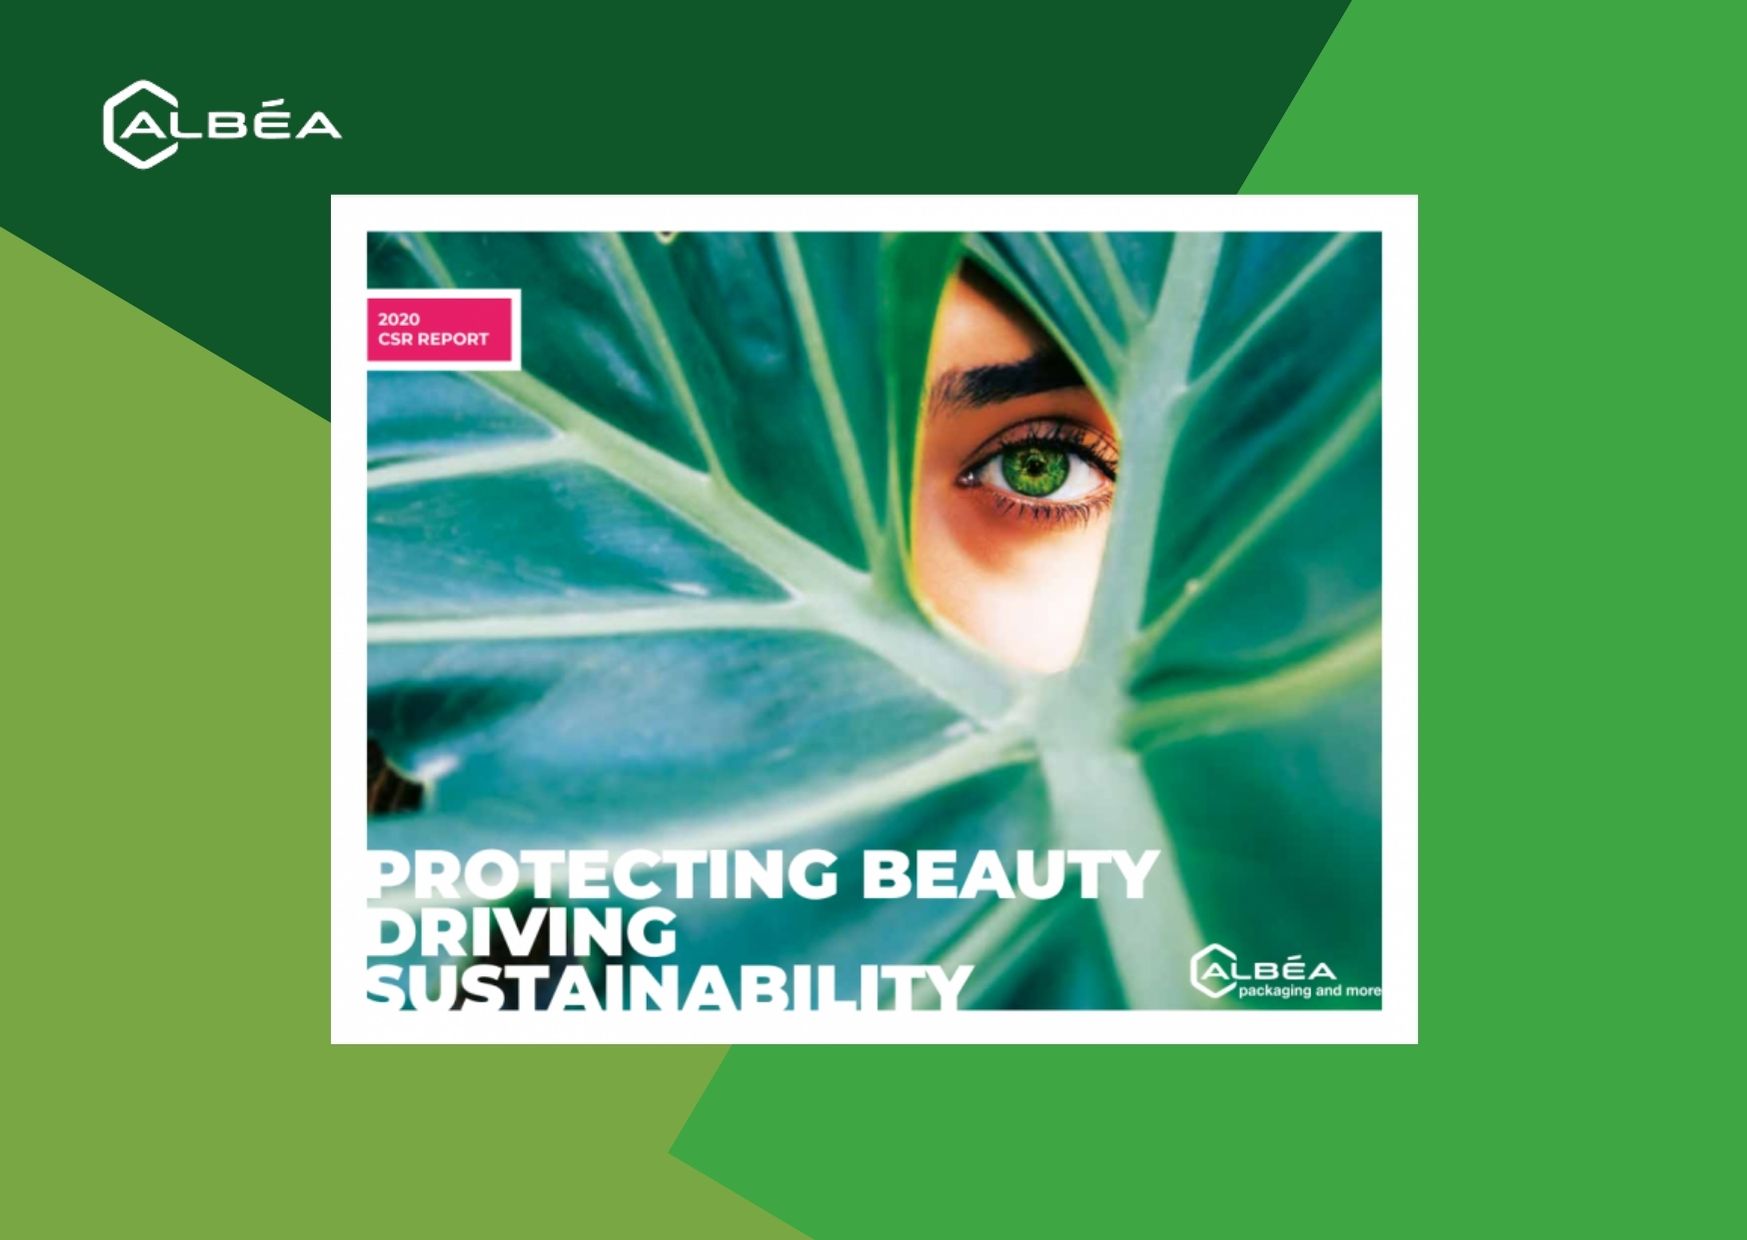 Albéa's 2020 CSR report is out! image